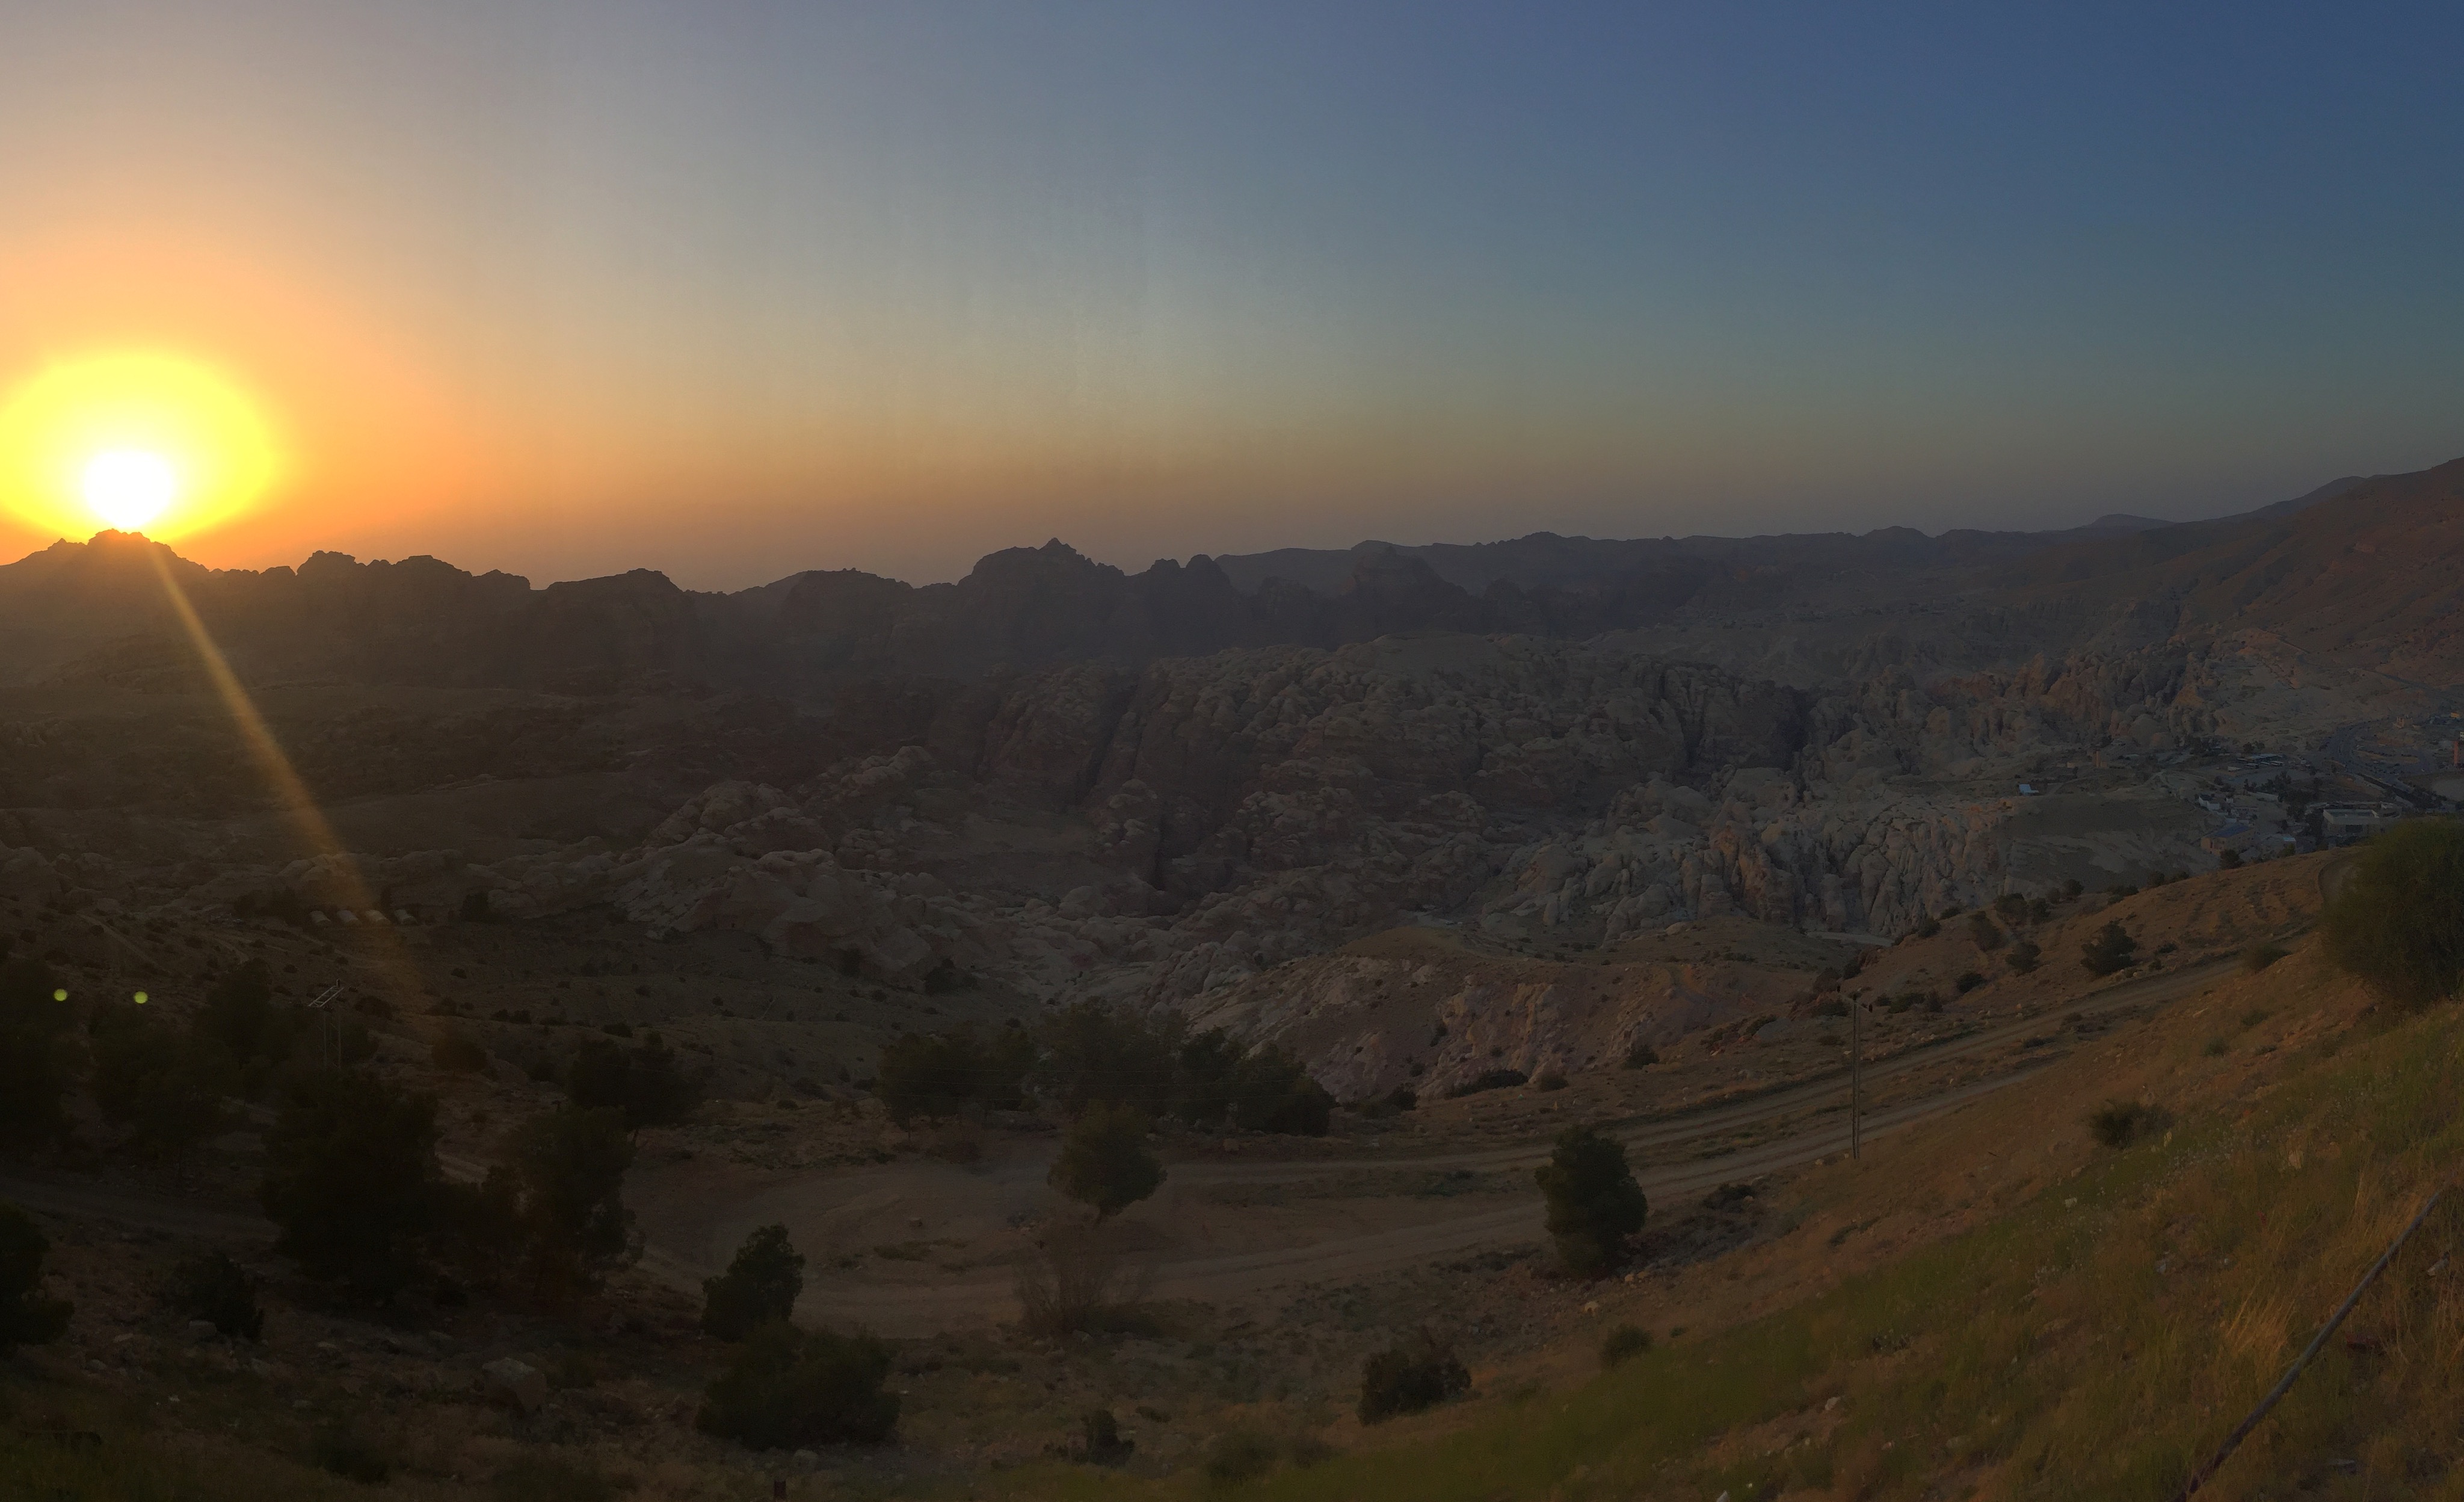 Petra sunset March